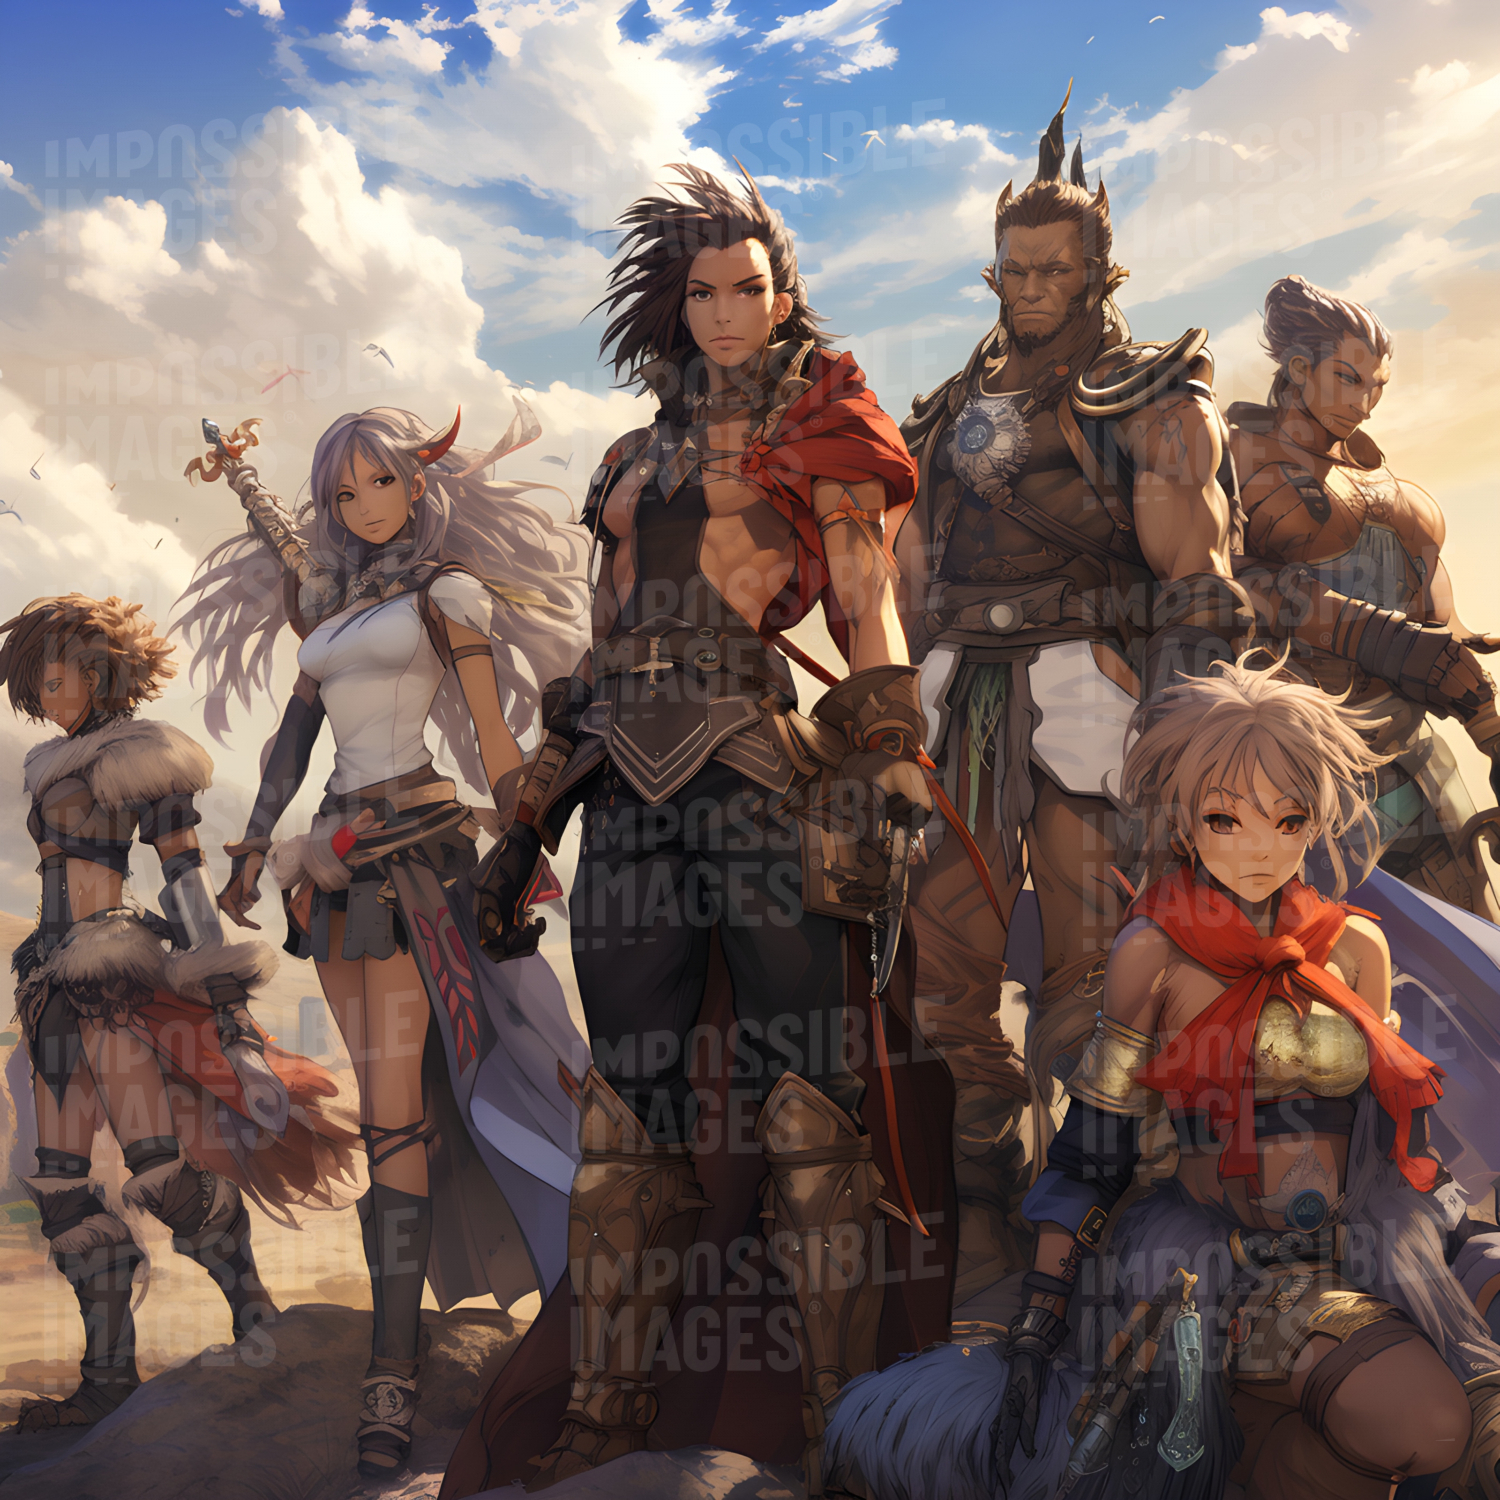 Anime-style party of diverse fantasy adventurers